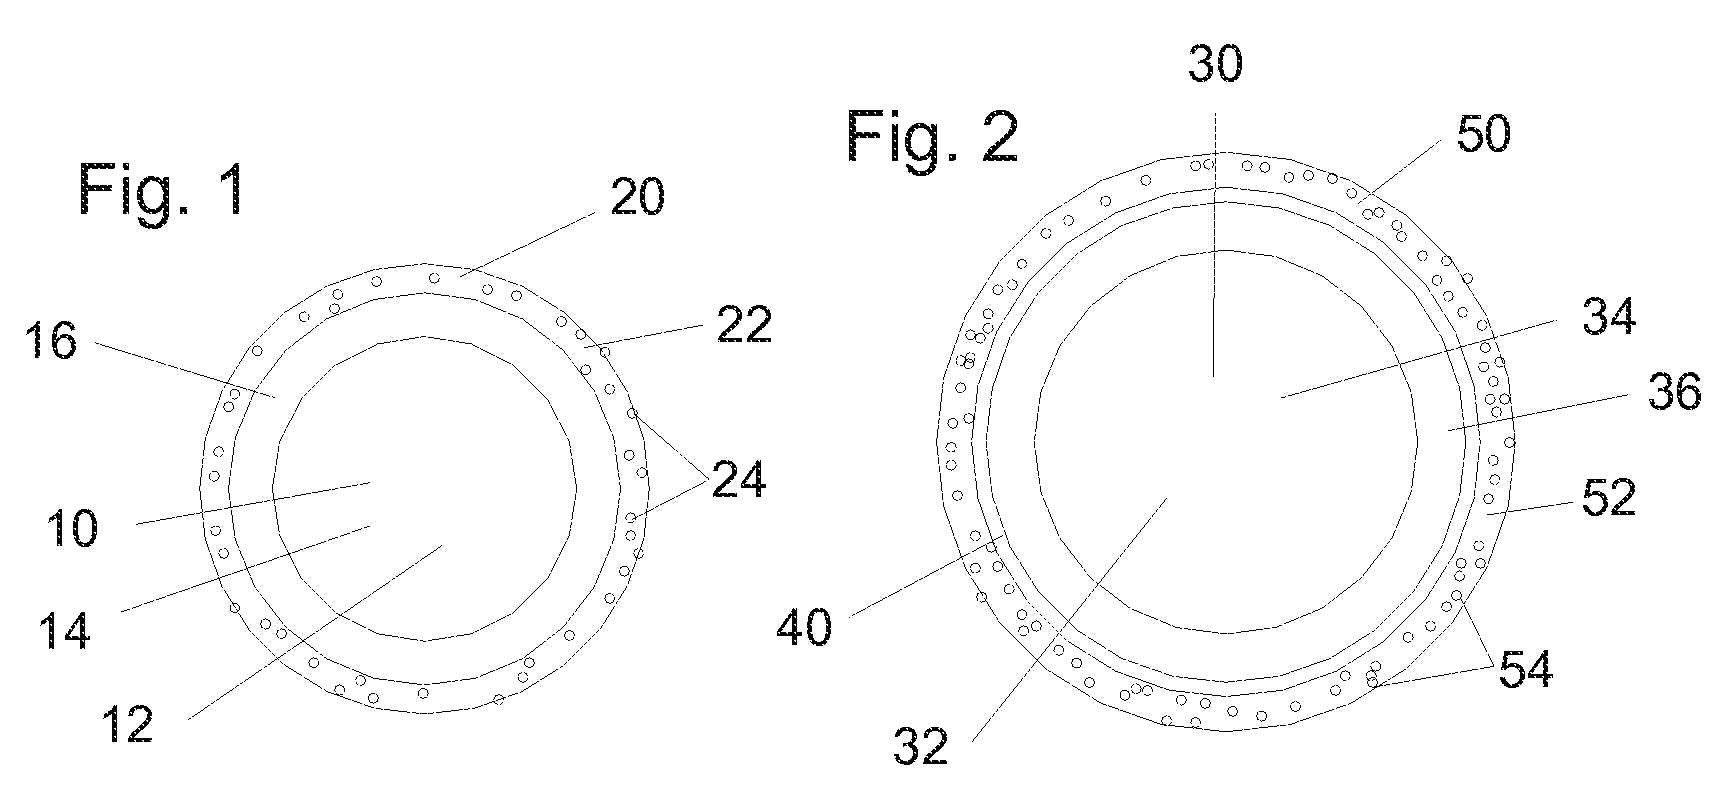 Post-functionalized roofing granules, and process for preparing same